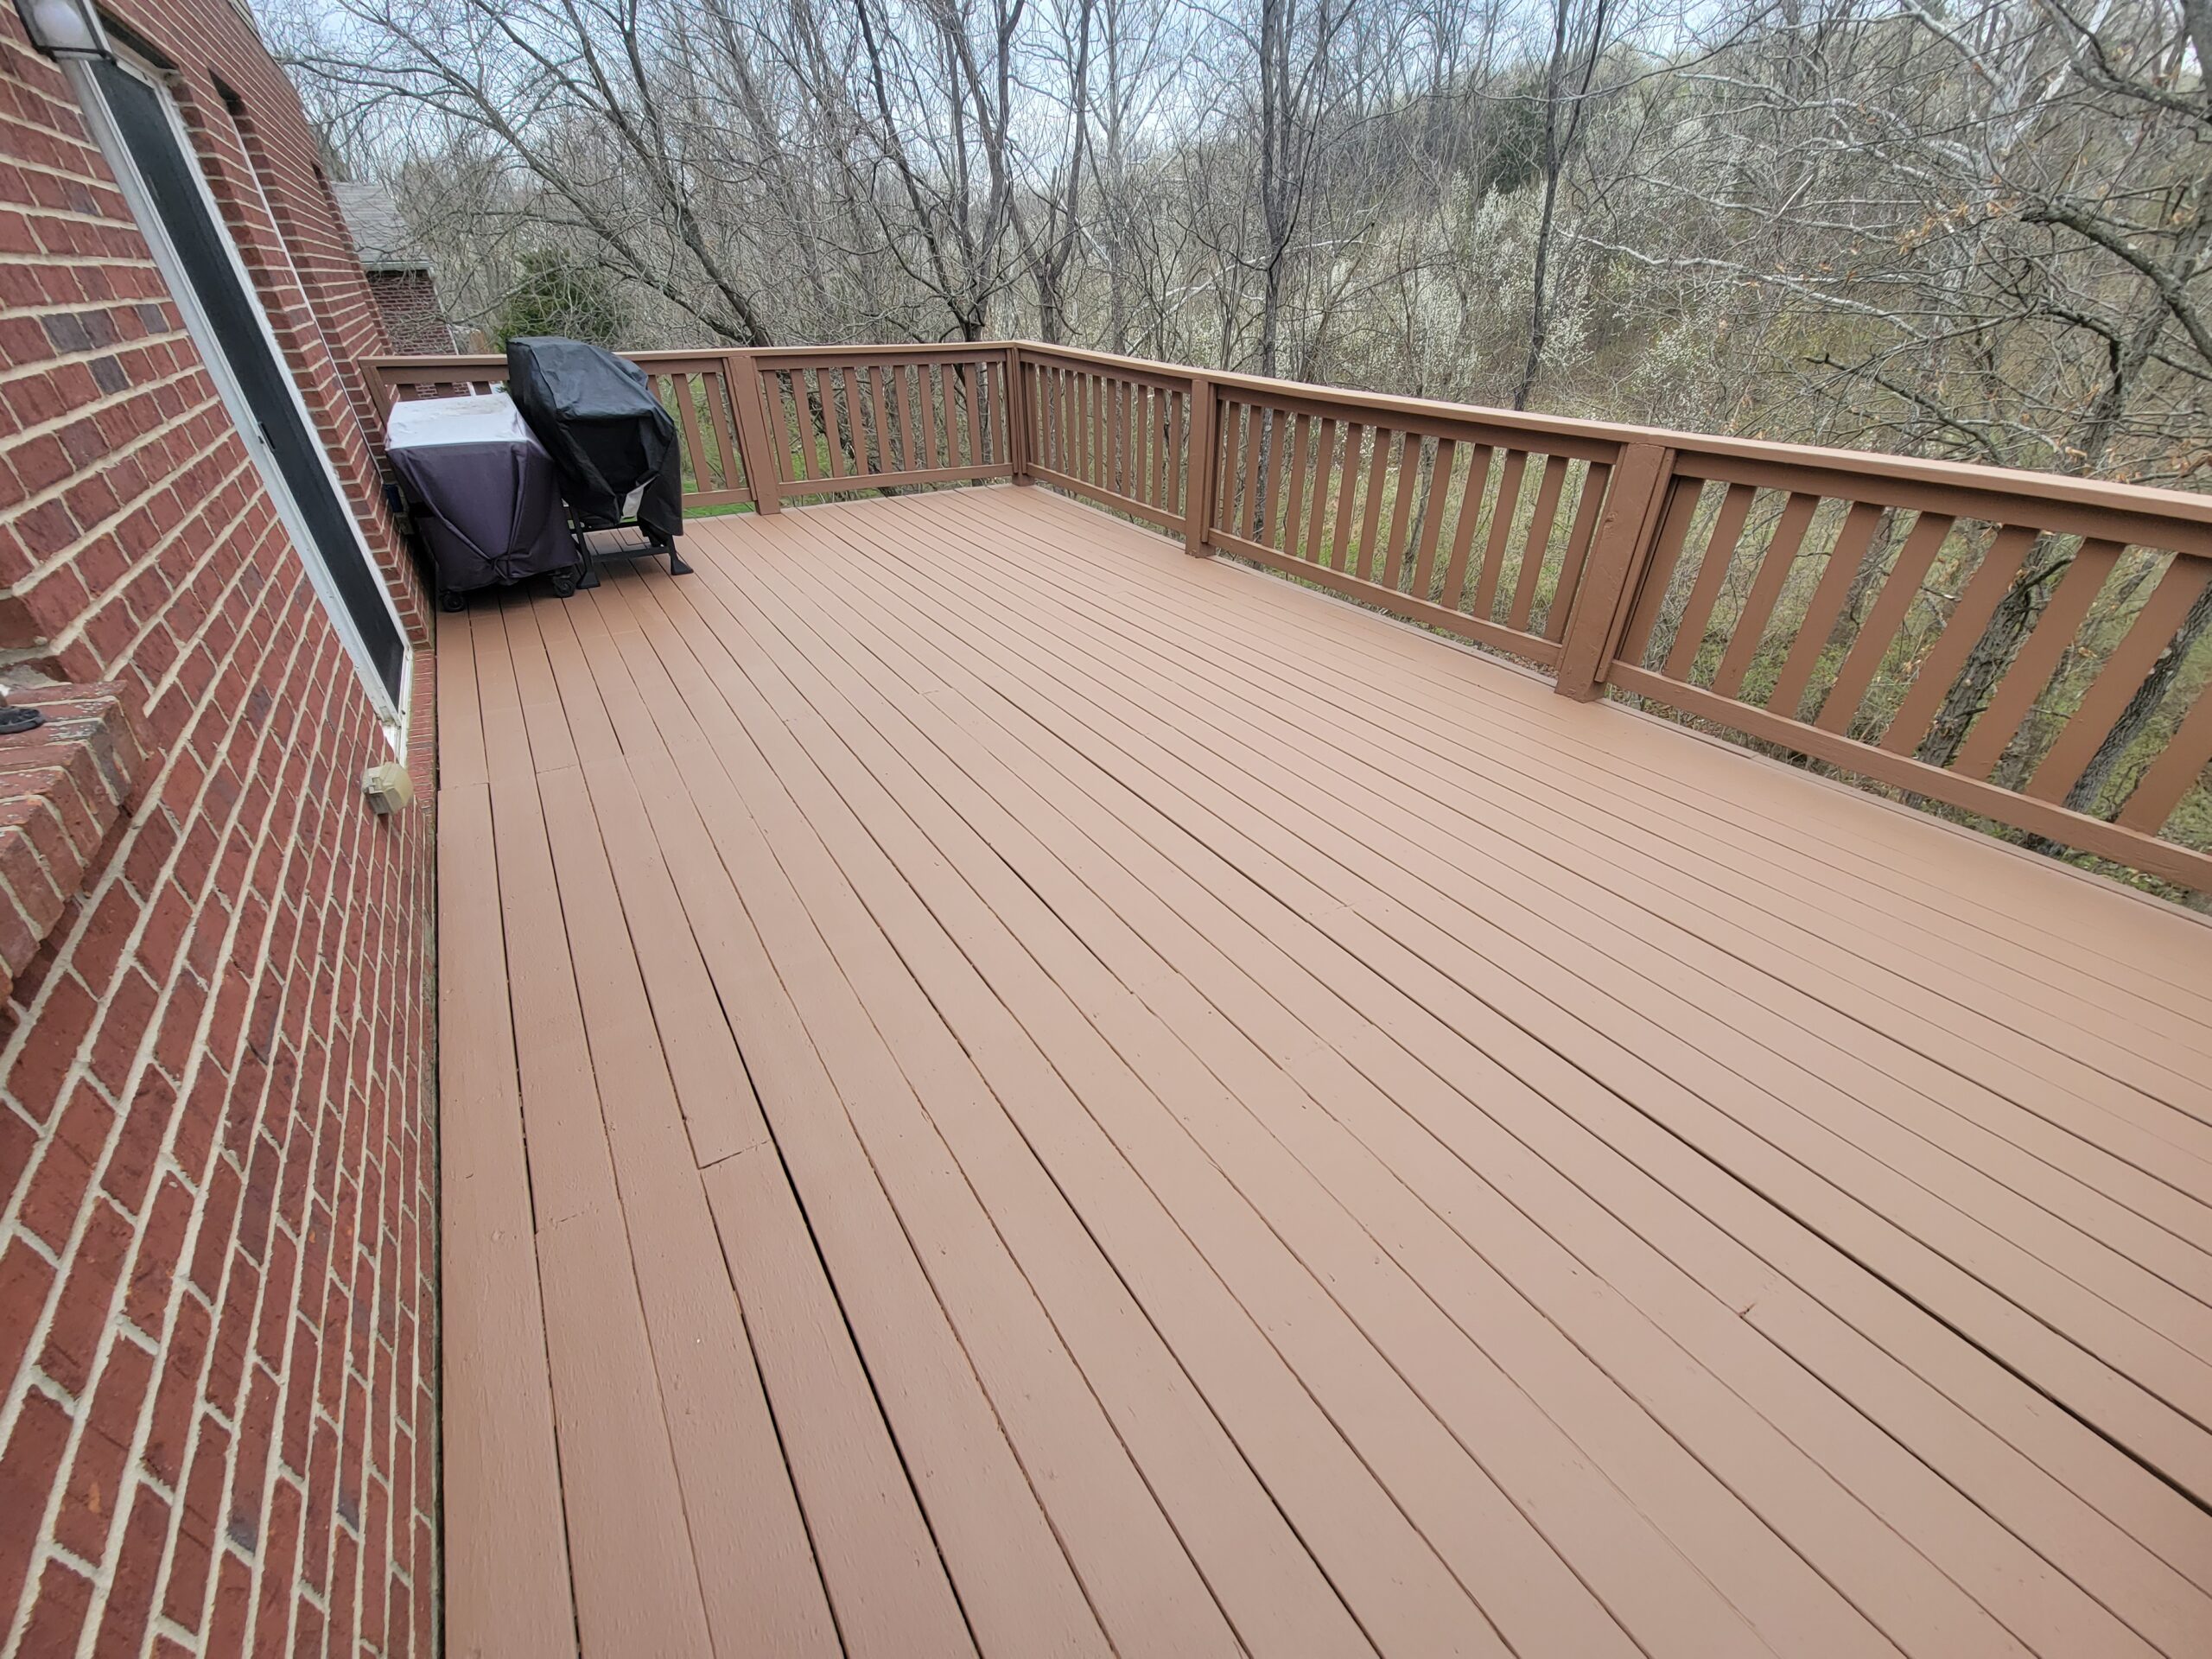 image of deck that has been resurfaced from peeling deck paint with a deck coating designed to encapsulate and lockdown peeling deck paints